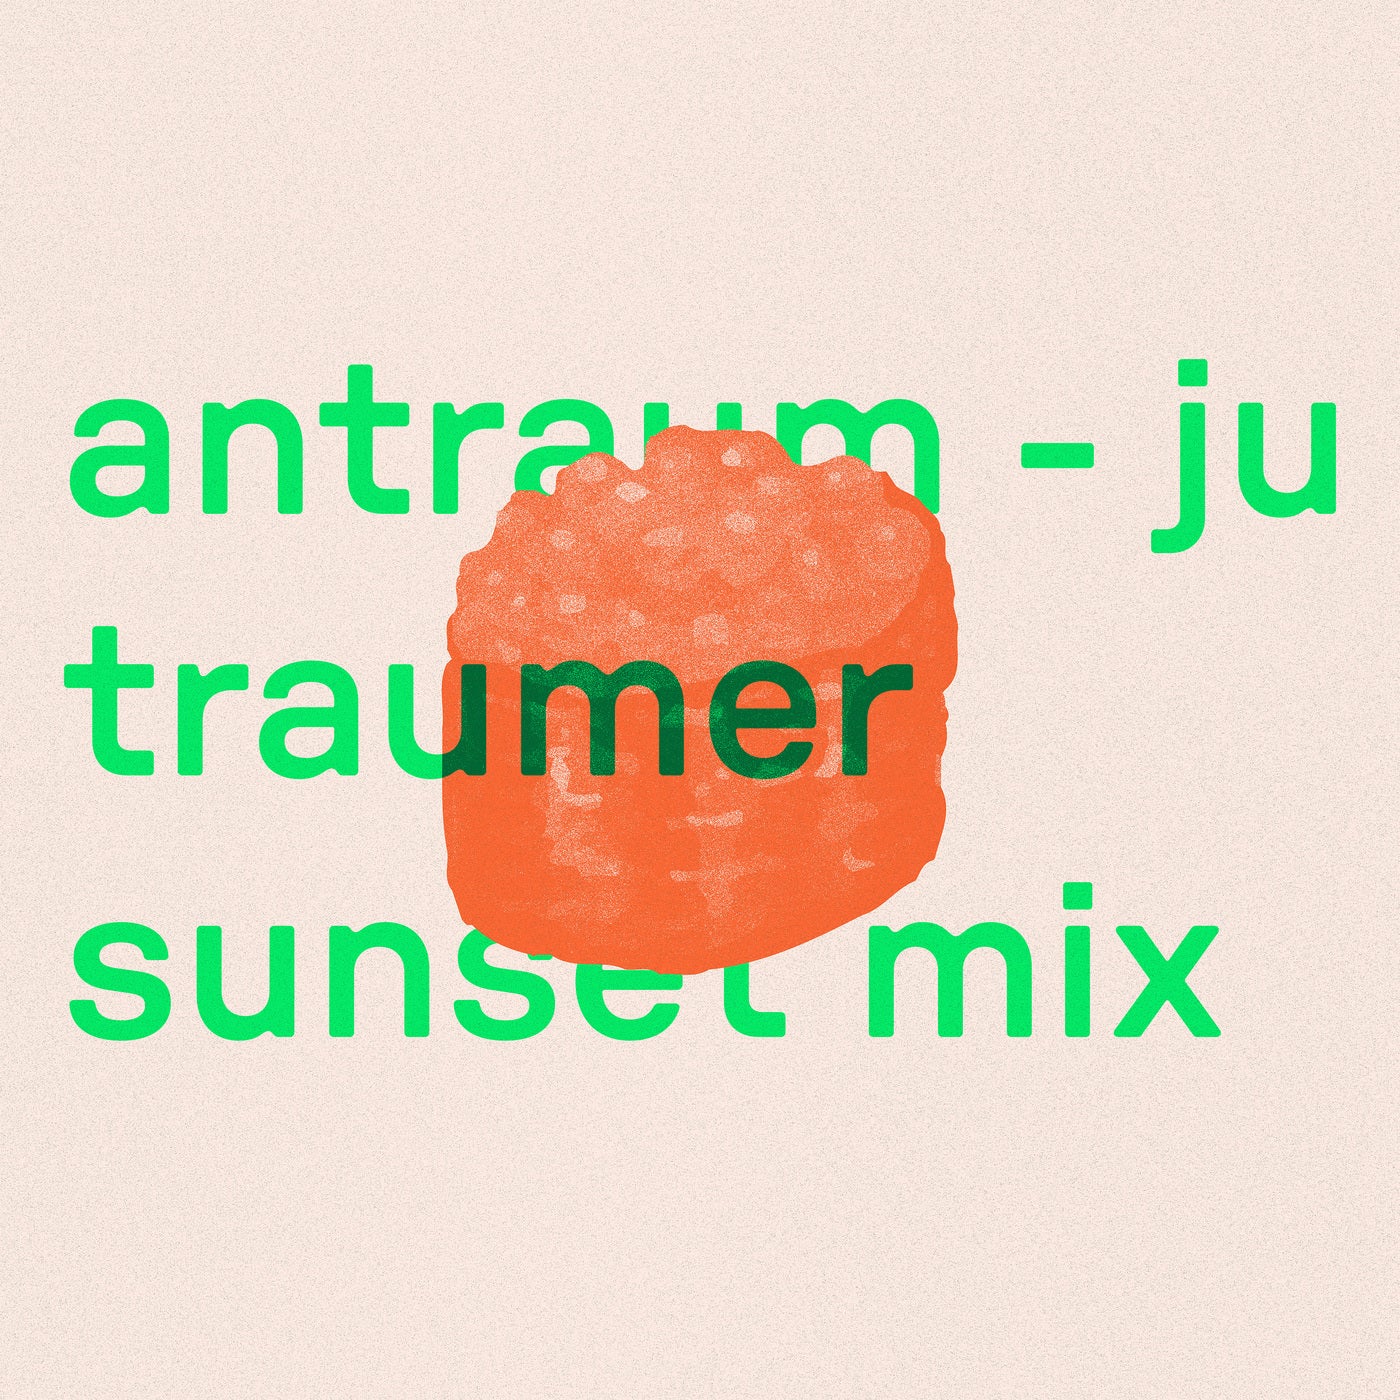 image cover: Traumer, Anton, antraum - Ju (Traumer Sunset Mix) on omakase_dgtl